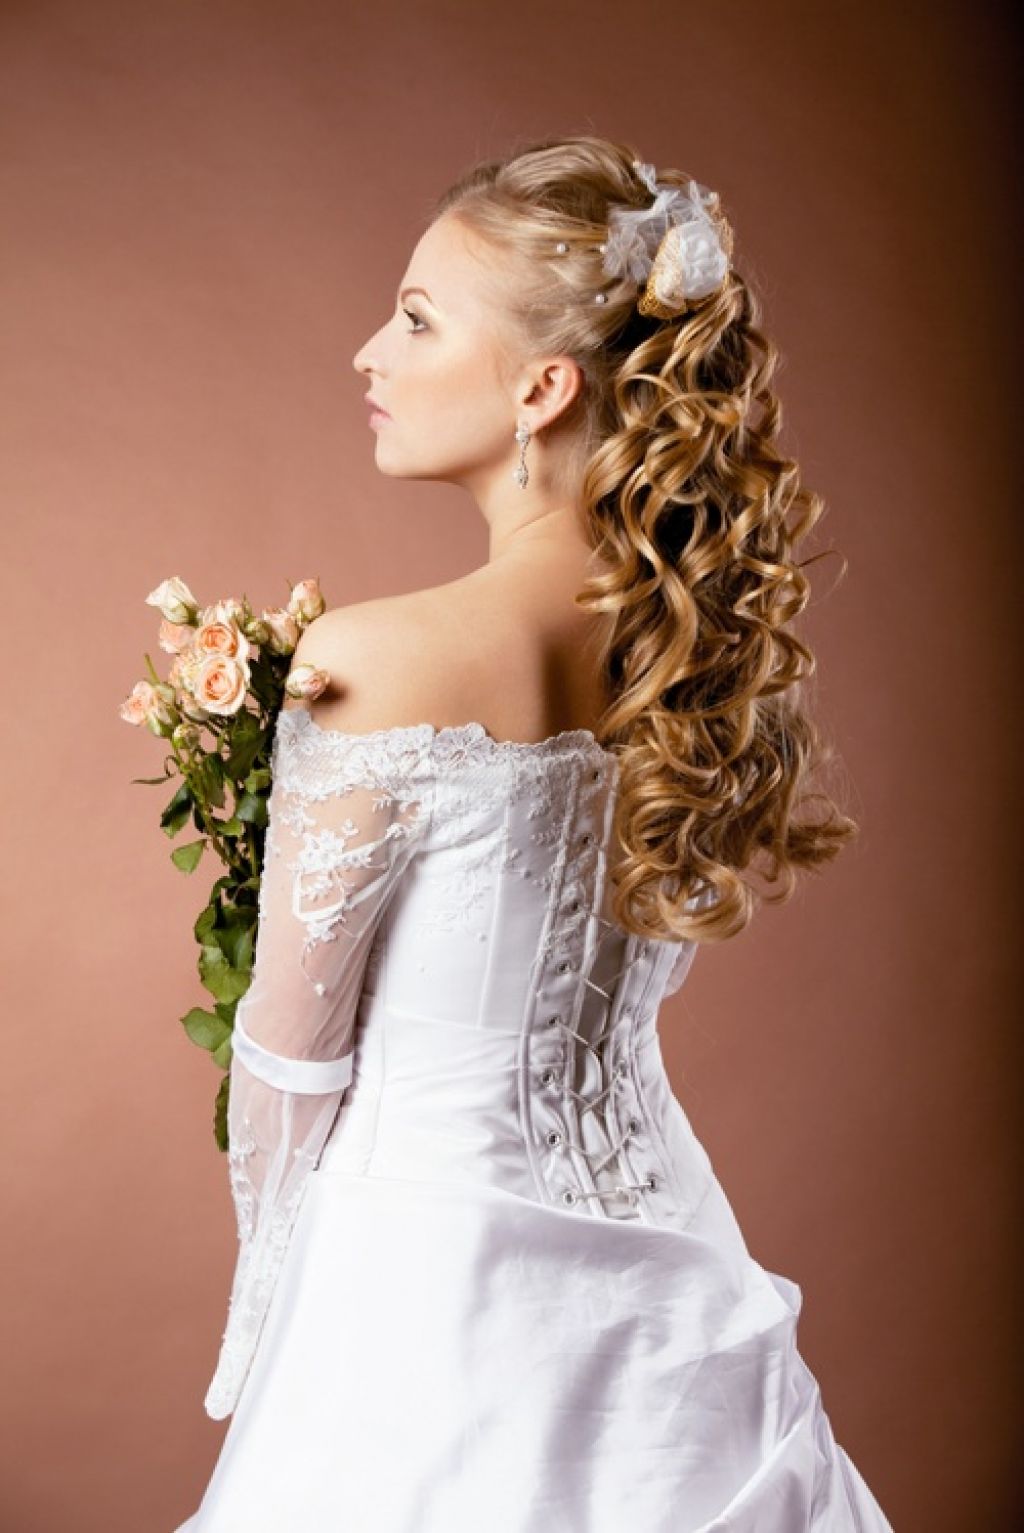 prom-hairstyles-down-and-curly-with-braid-braid-hairstyle-half-up-half-down-braid-curly-prom-hairstyles-on--point-of-view